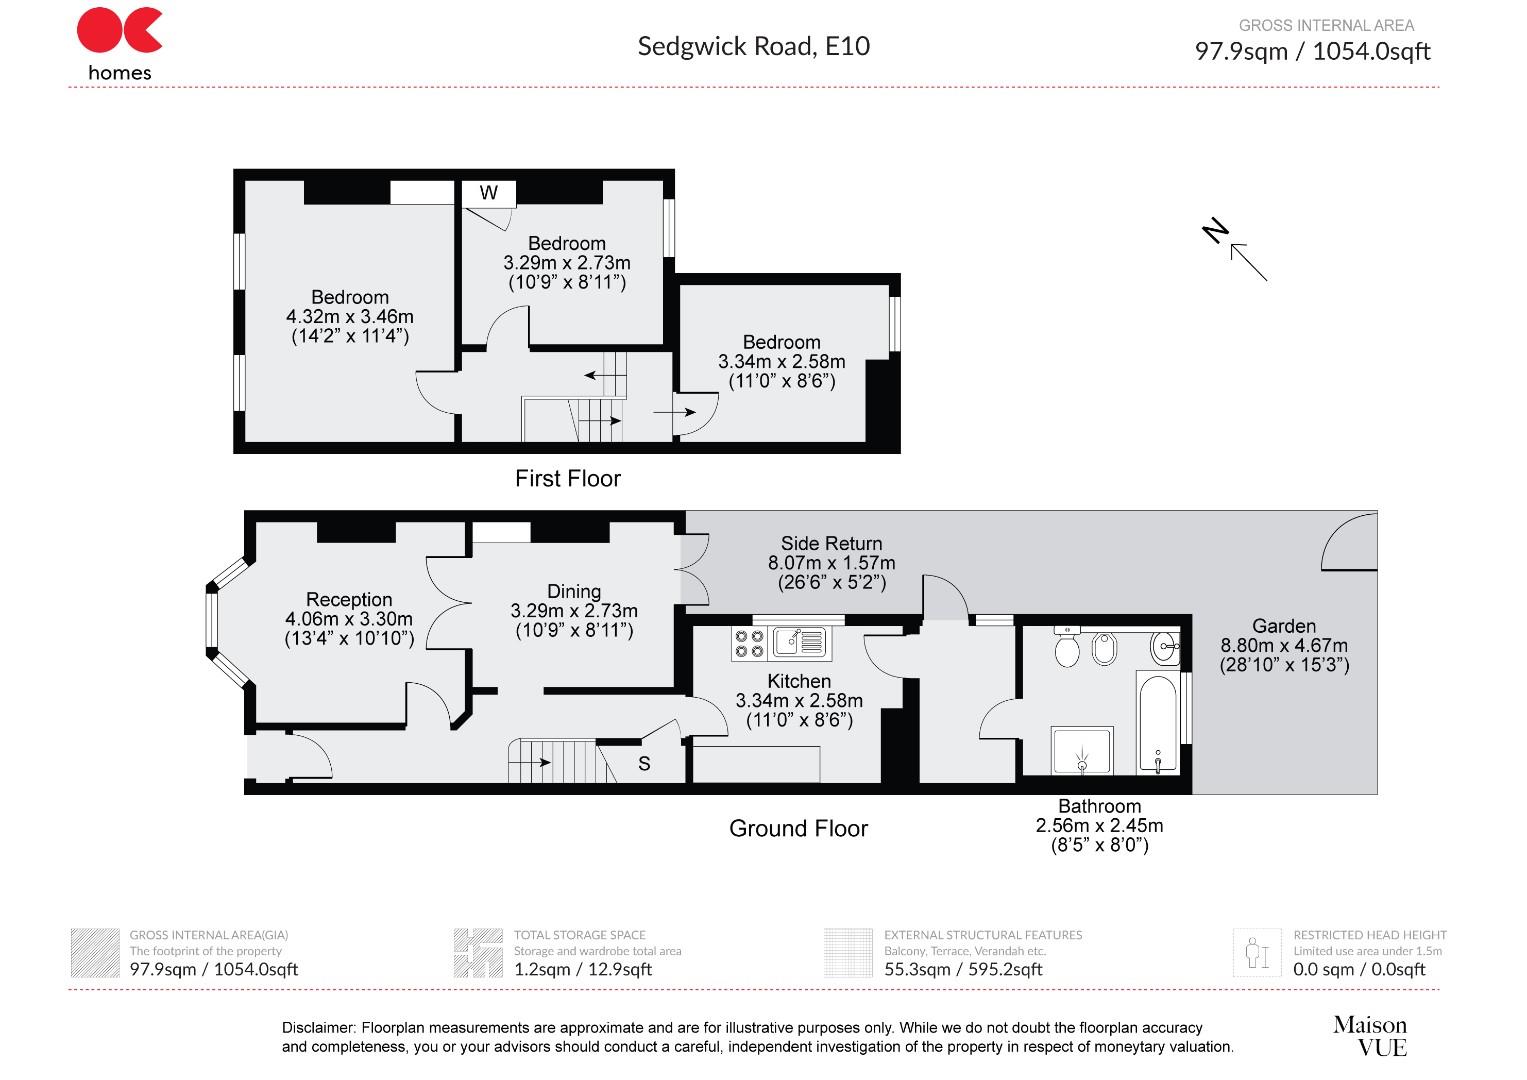 3 bed terraced house for sale in Sedgwick Road, Leyton - Property floorplan